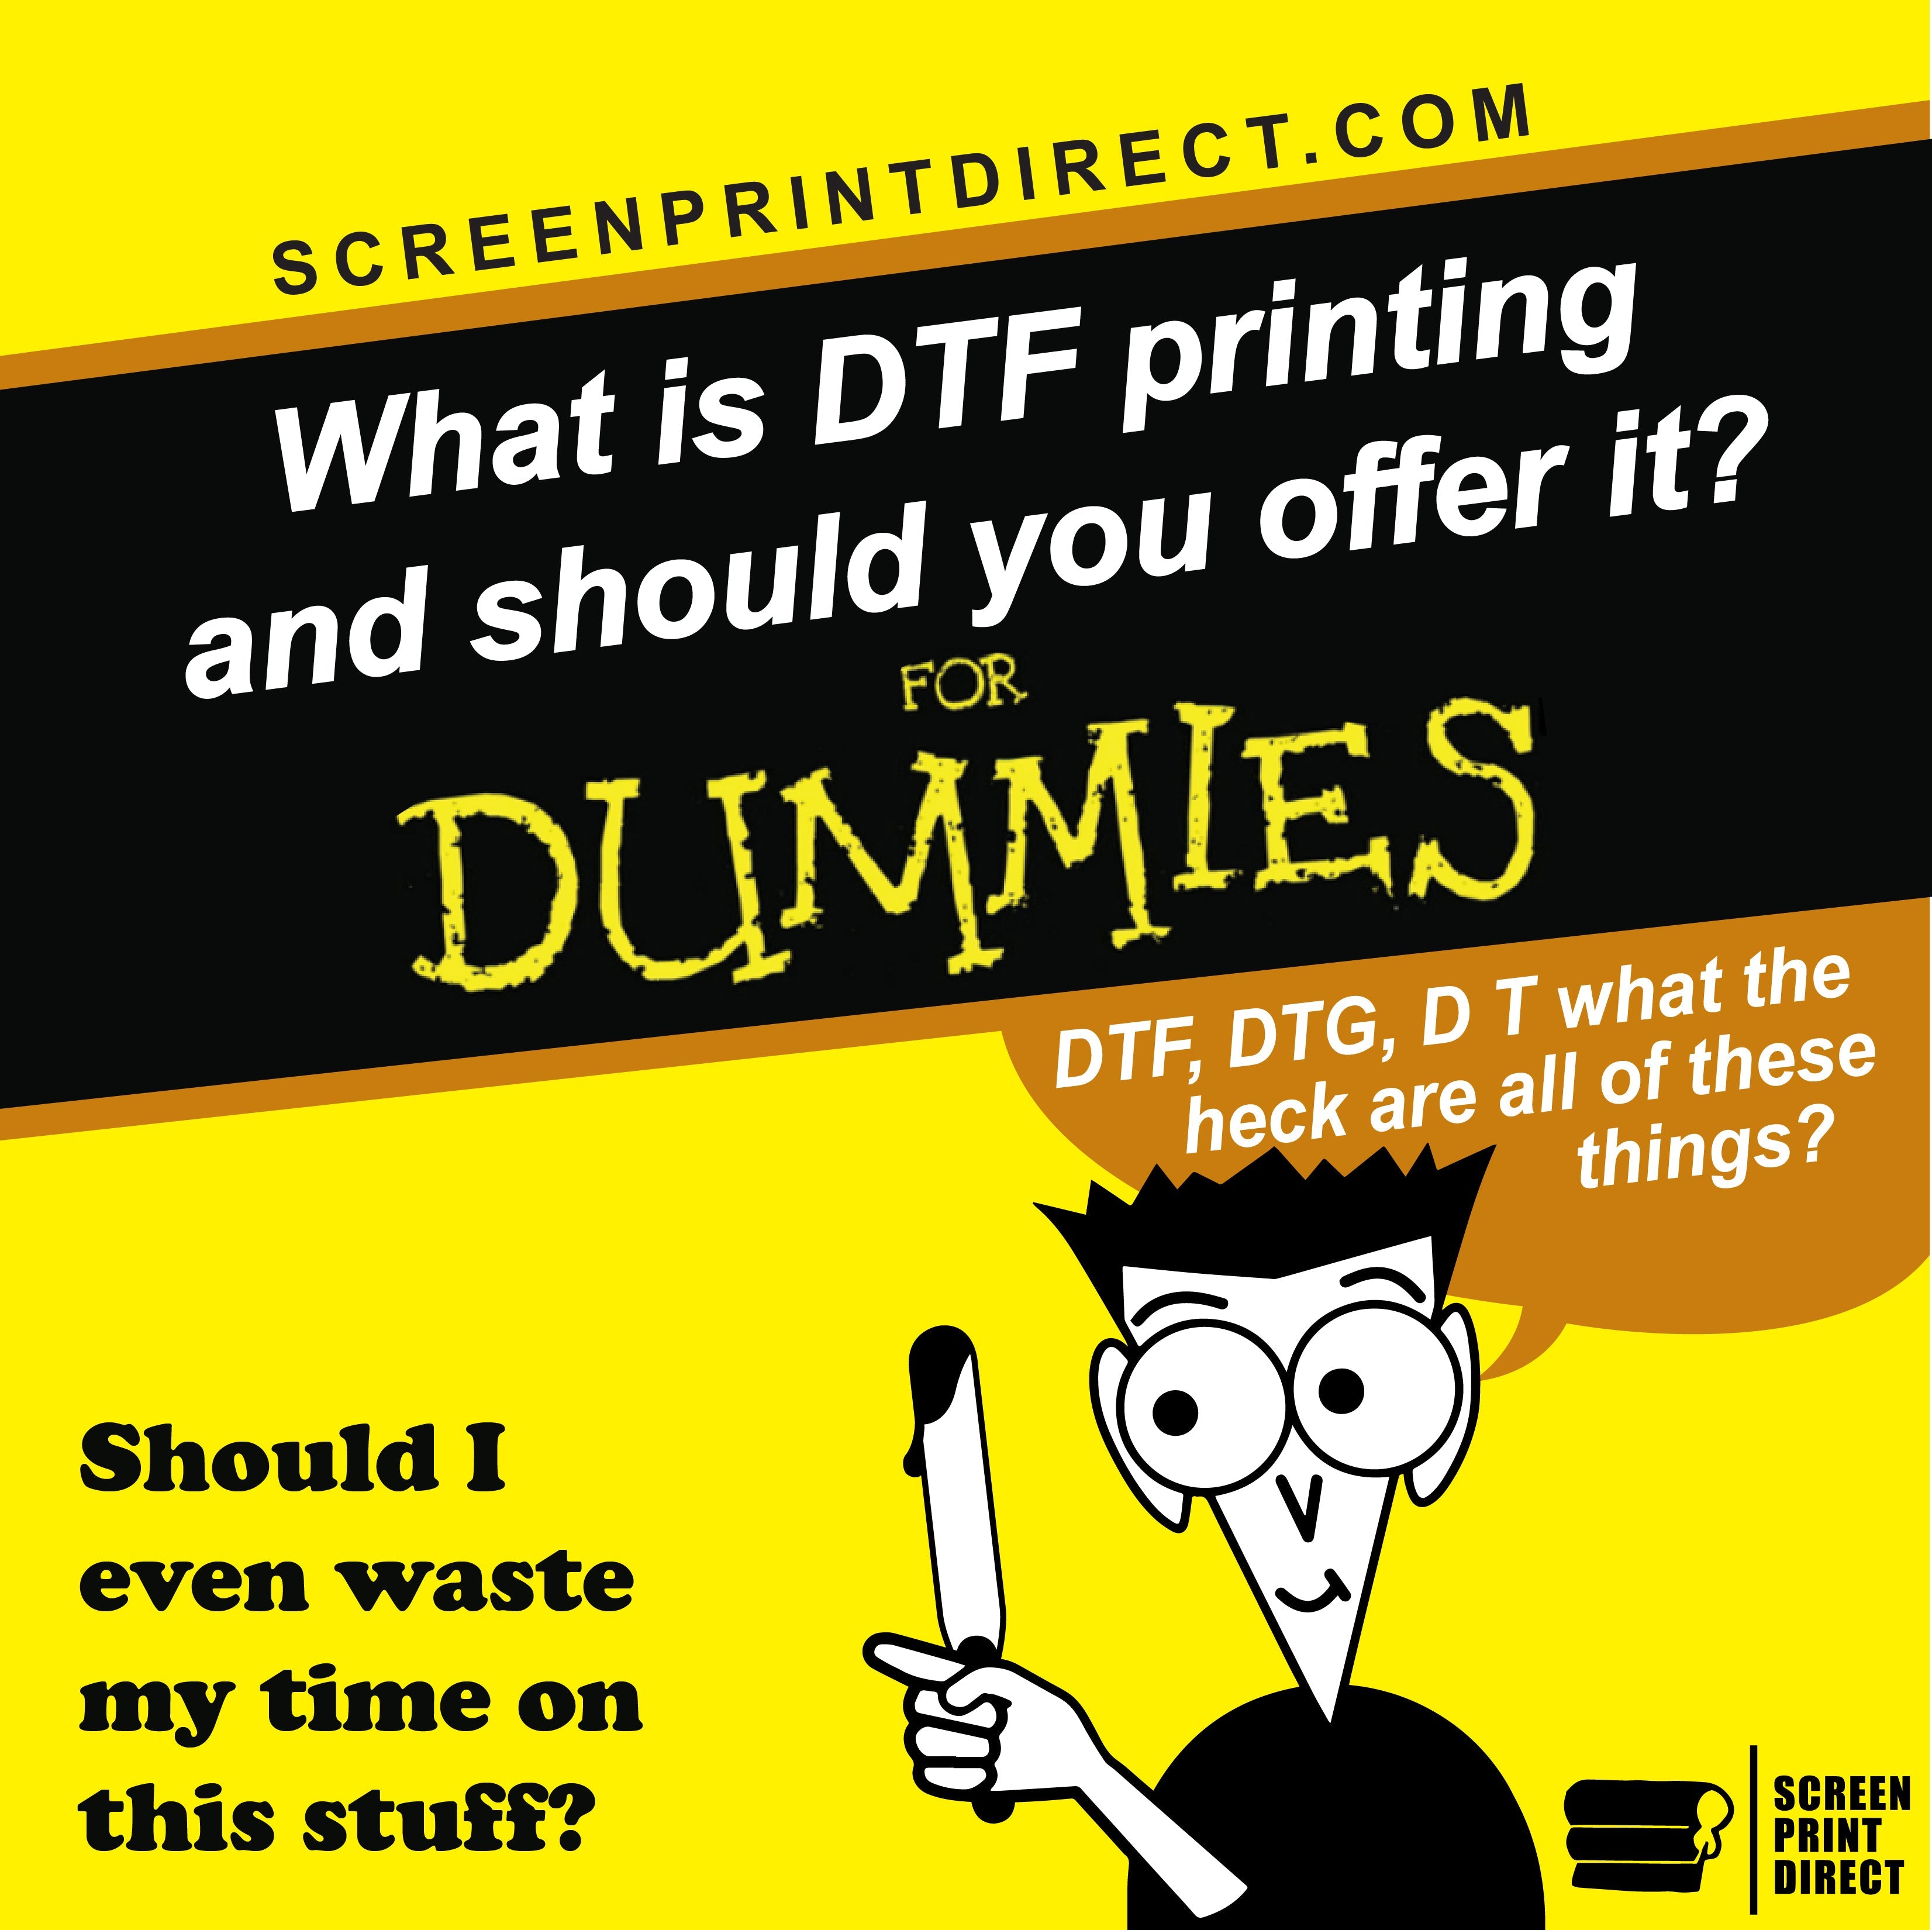 2024 Guide: DTF Printer for Beginners (DTF Printers for Small Business –  DTF Printer USA